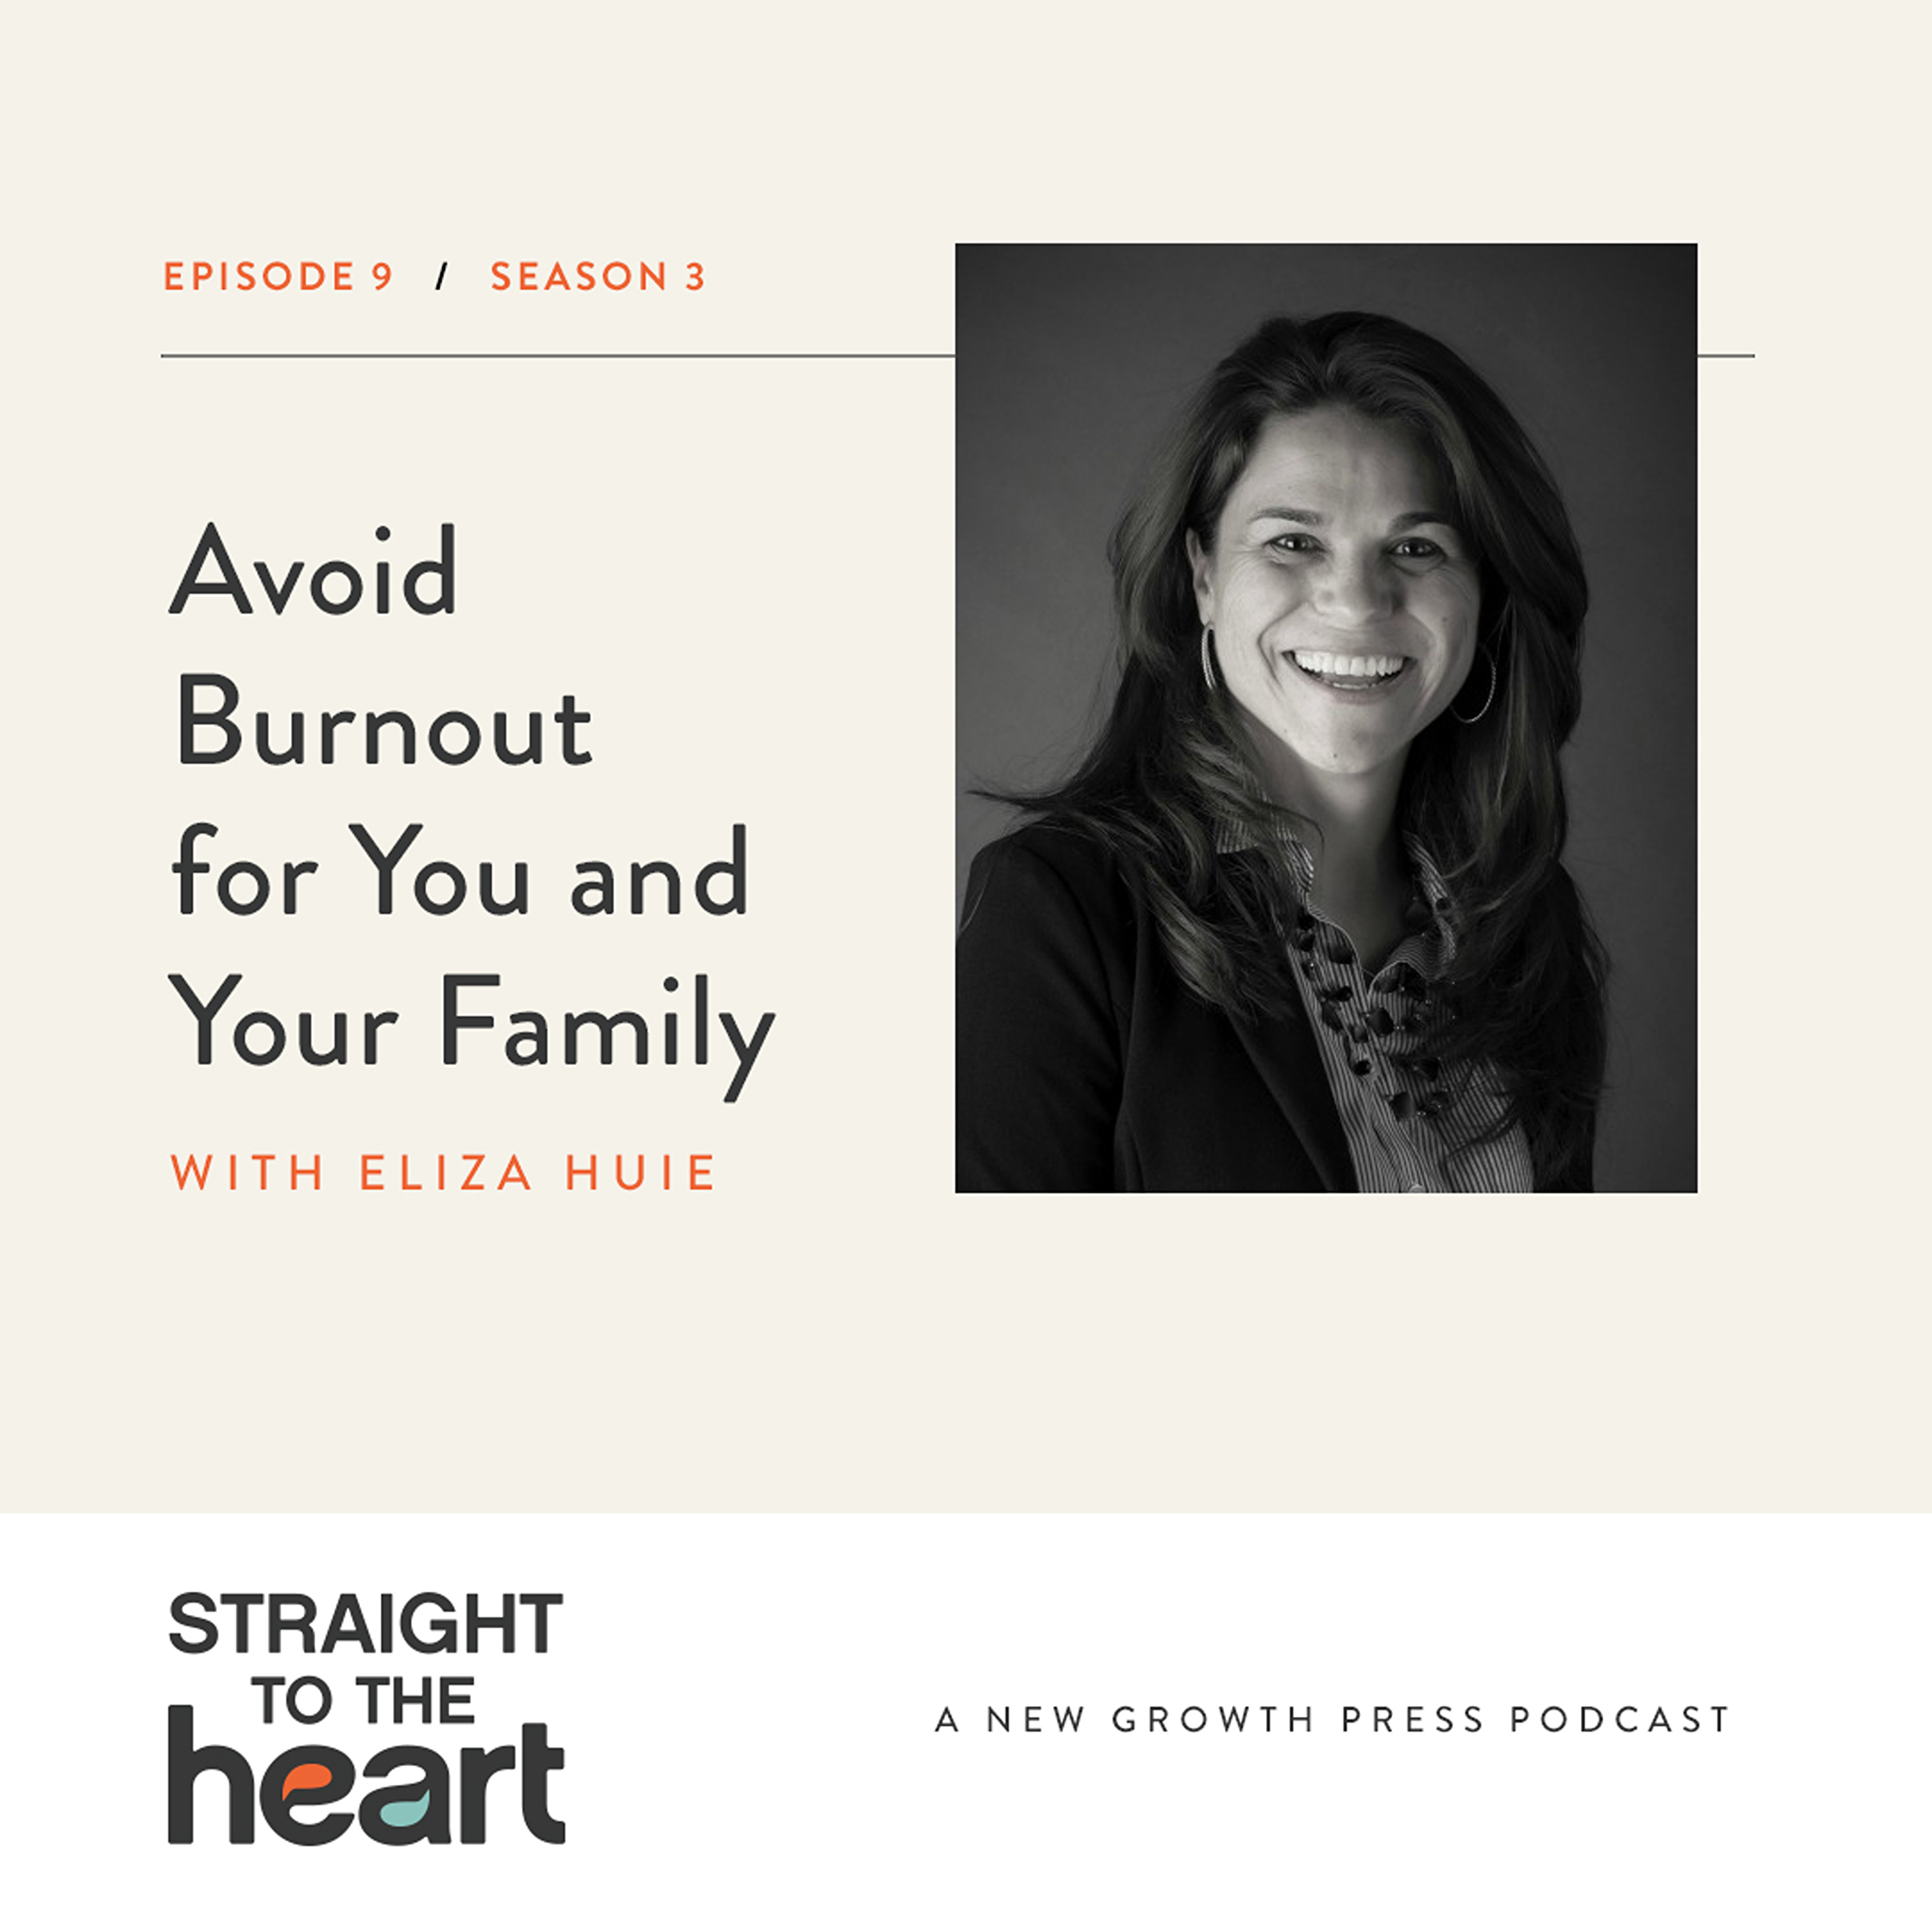 Avoid Burnout for You and Your Family with Eliza Huie